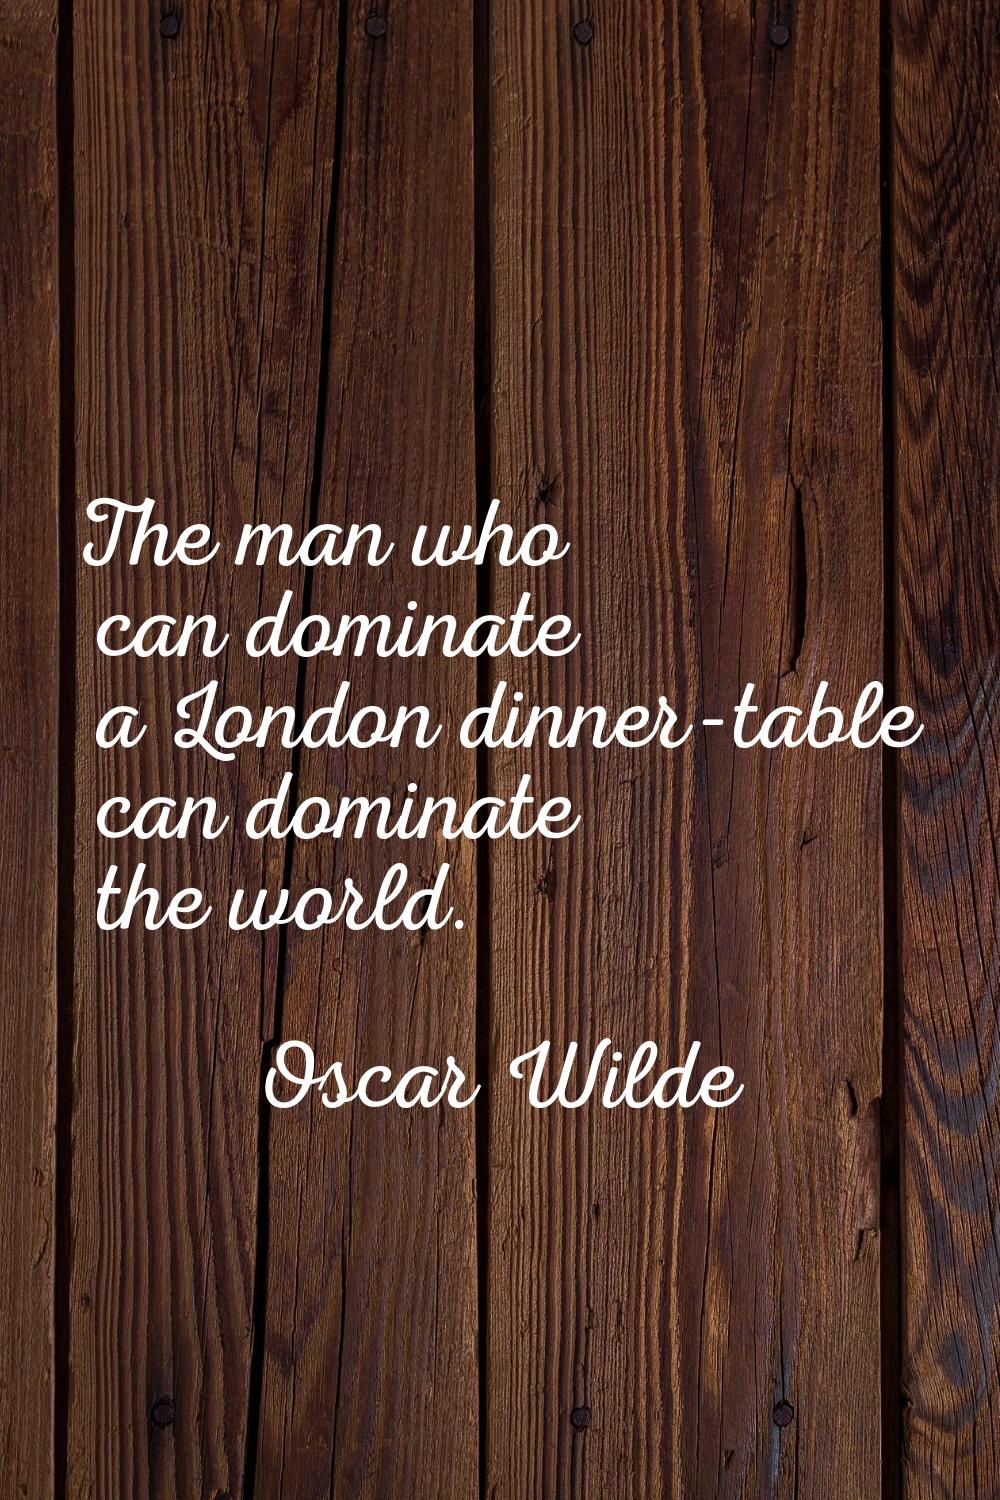 The man who can dominate a London dinner-table can dominate the world.